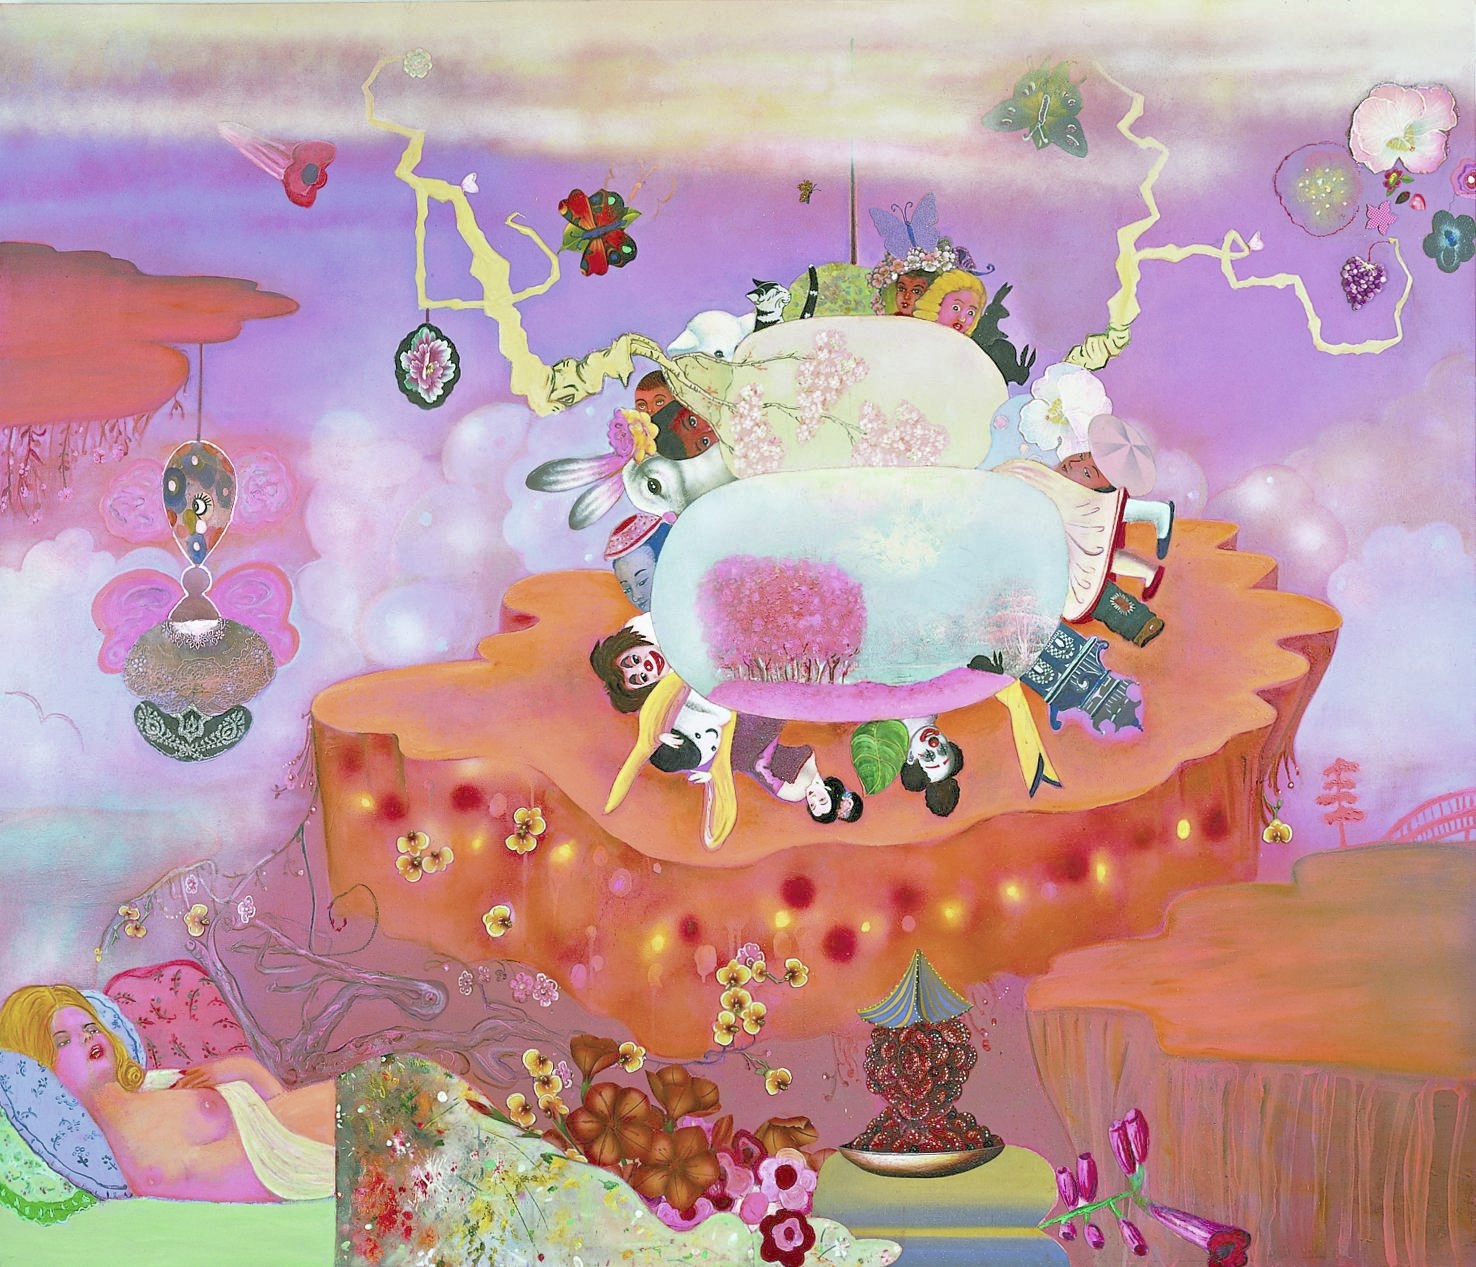 Picturing a Model World, 50" × 72", mixed media and collage on canvas, 2003